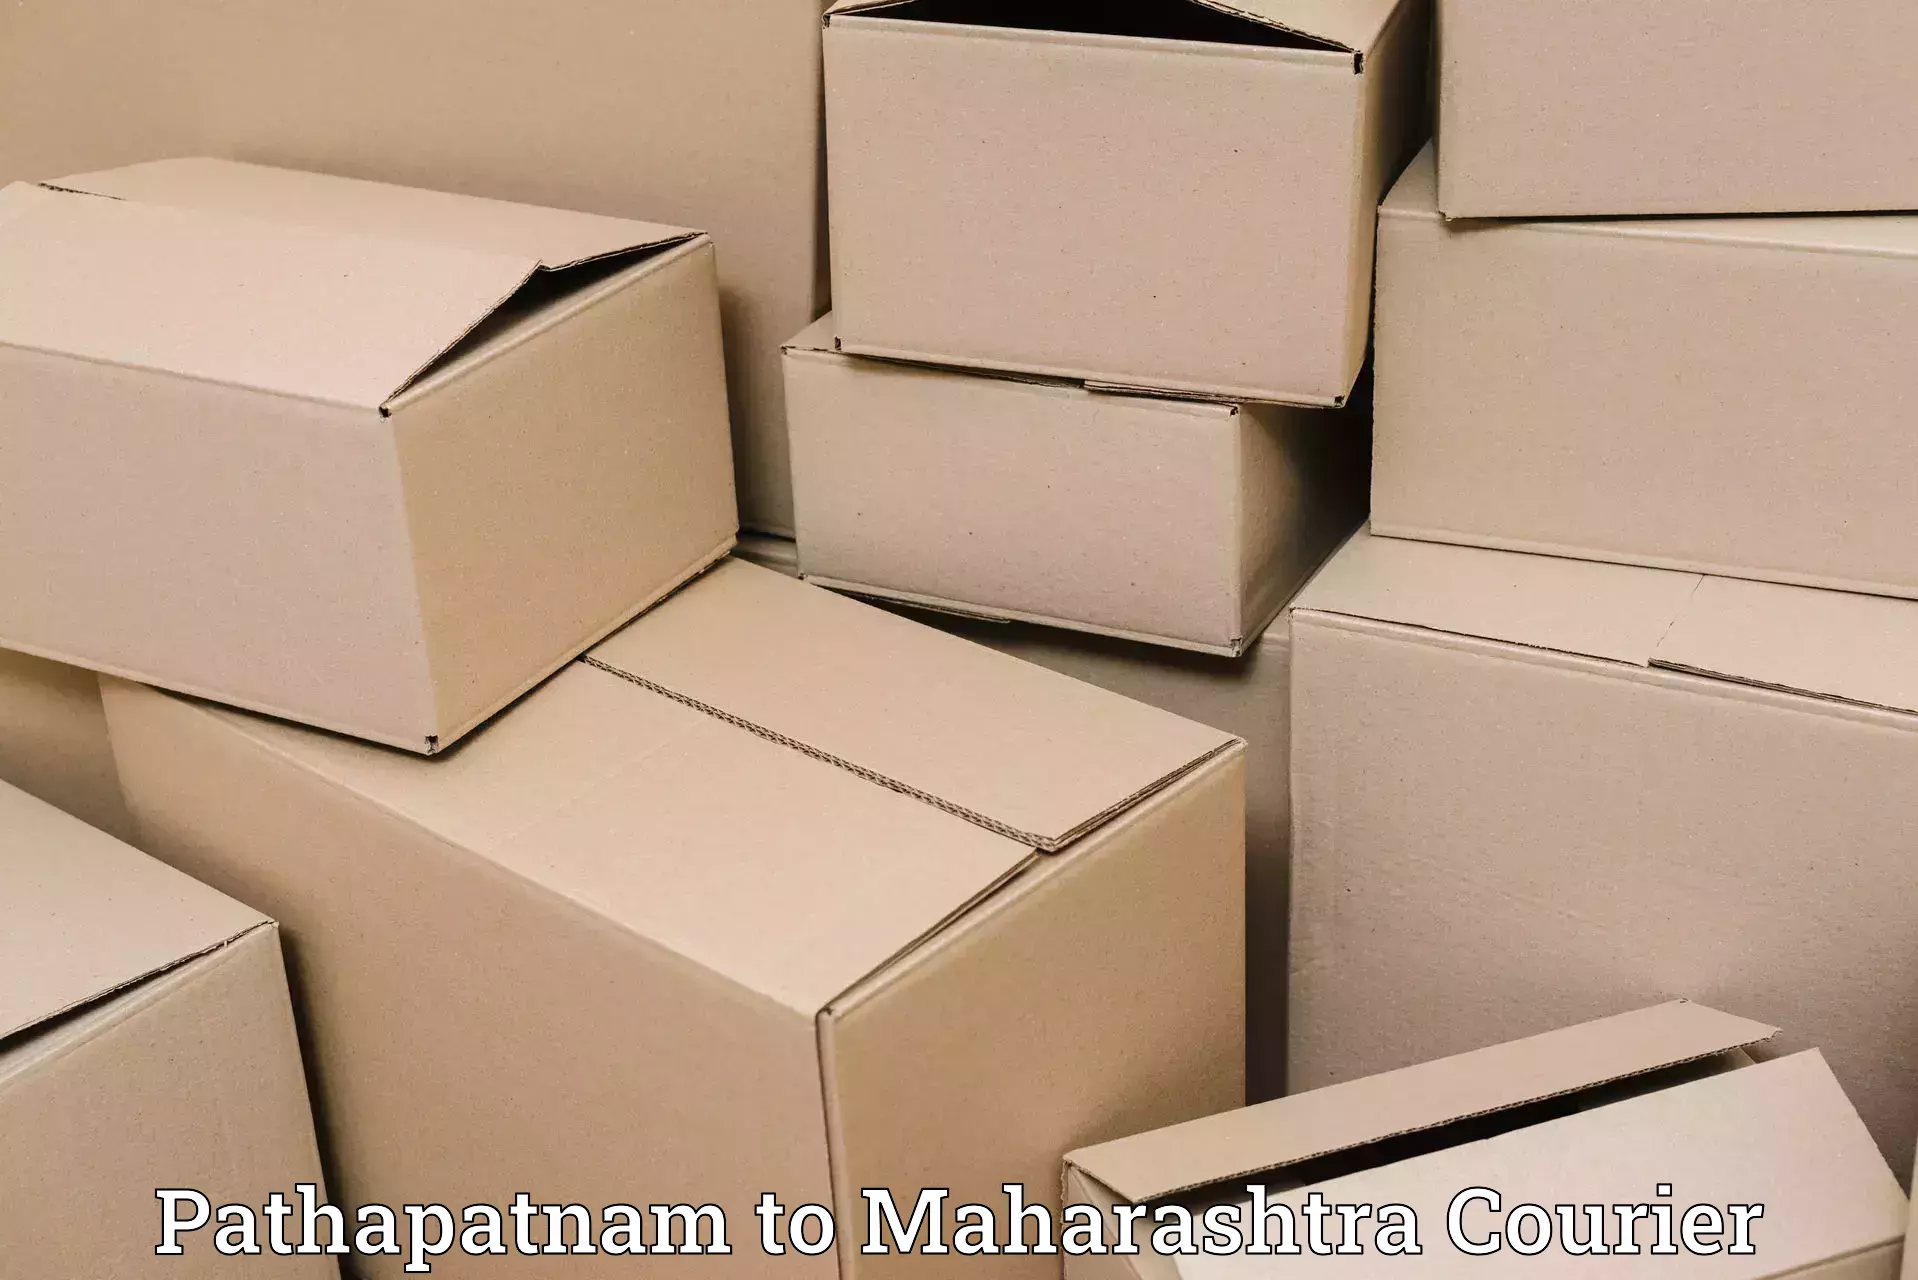 Efficient shipping operations Pathapatnam to Jafrabad Jalna